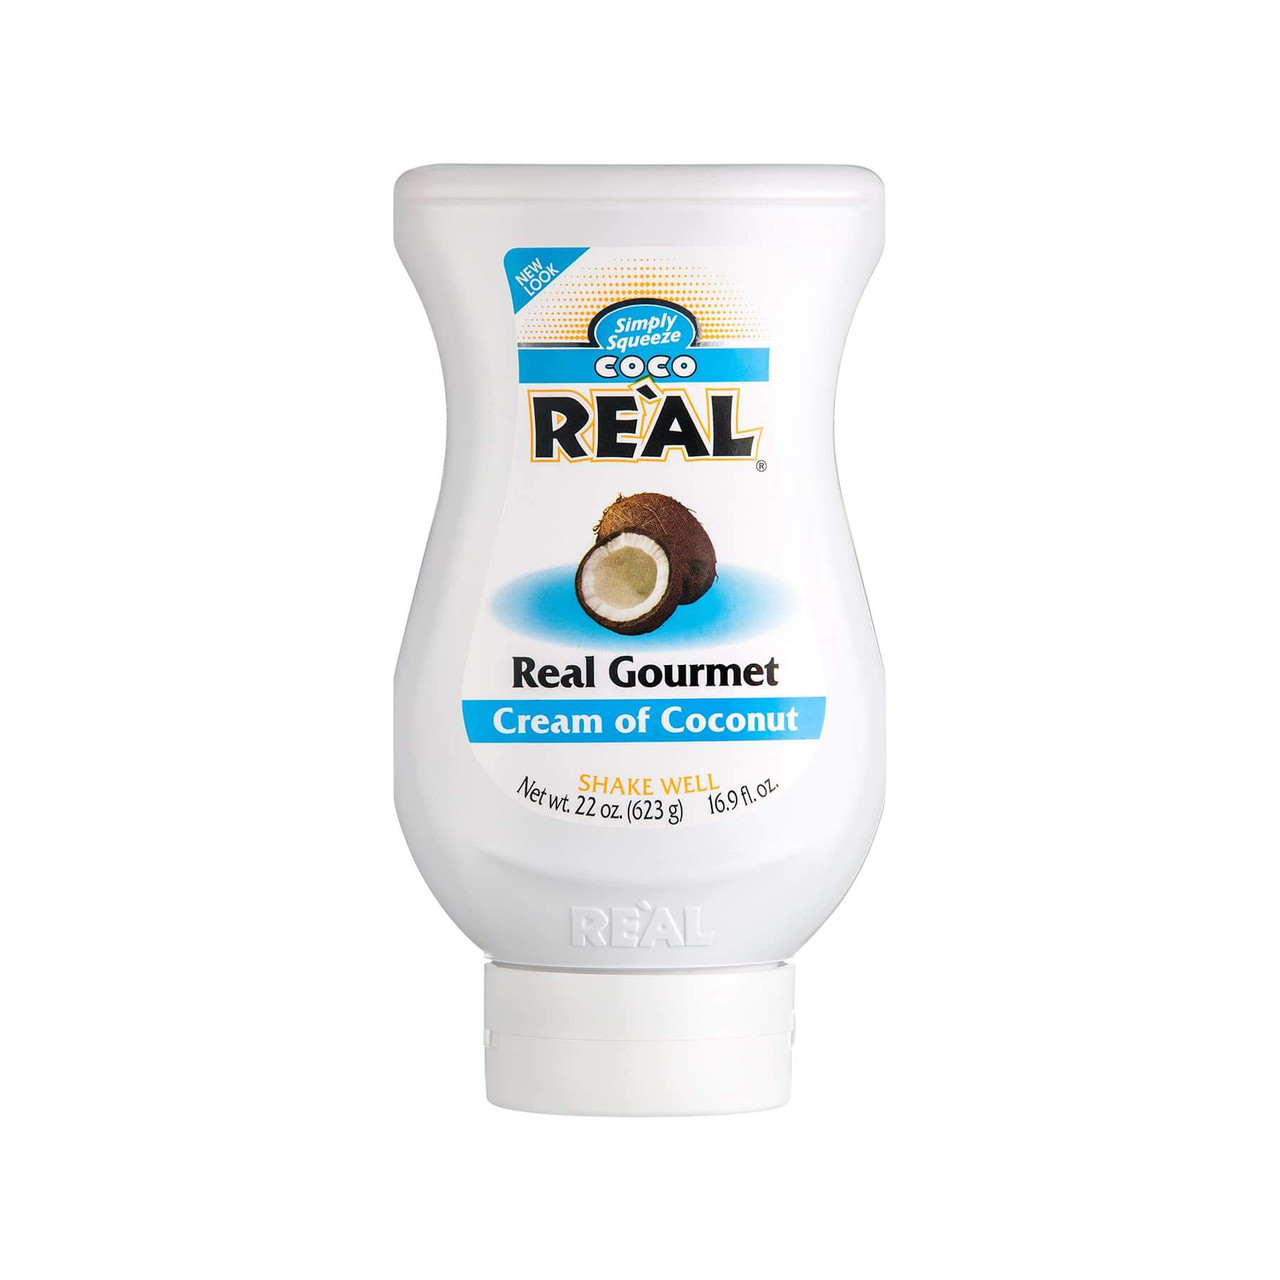 Coco Real Authentic Cream of Coconut Squeezable Bottle -16.9 oz